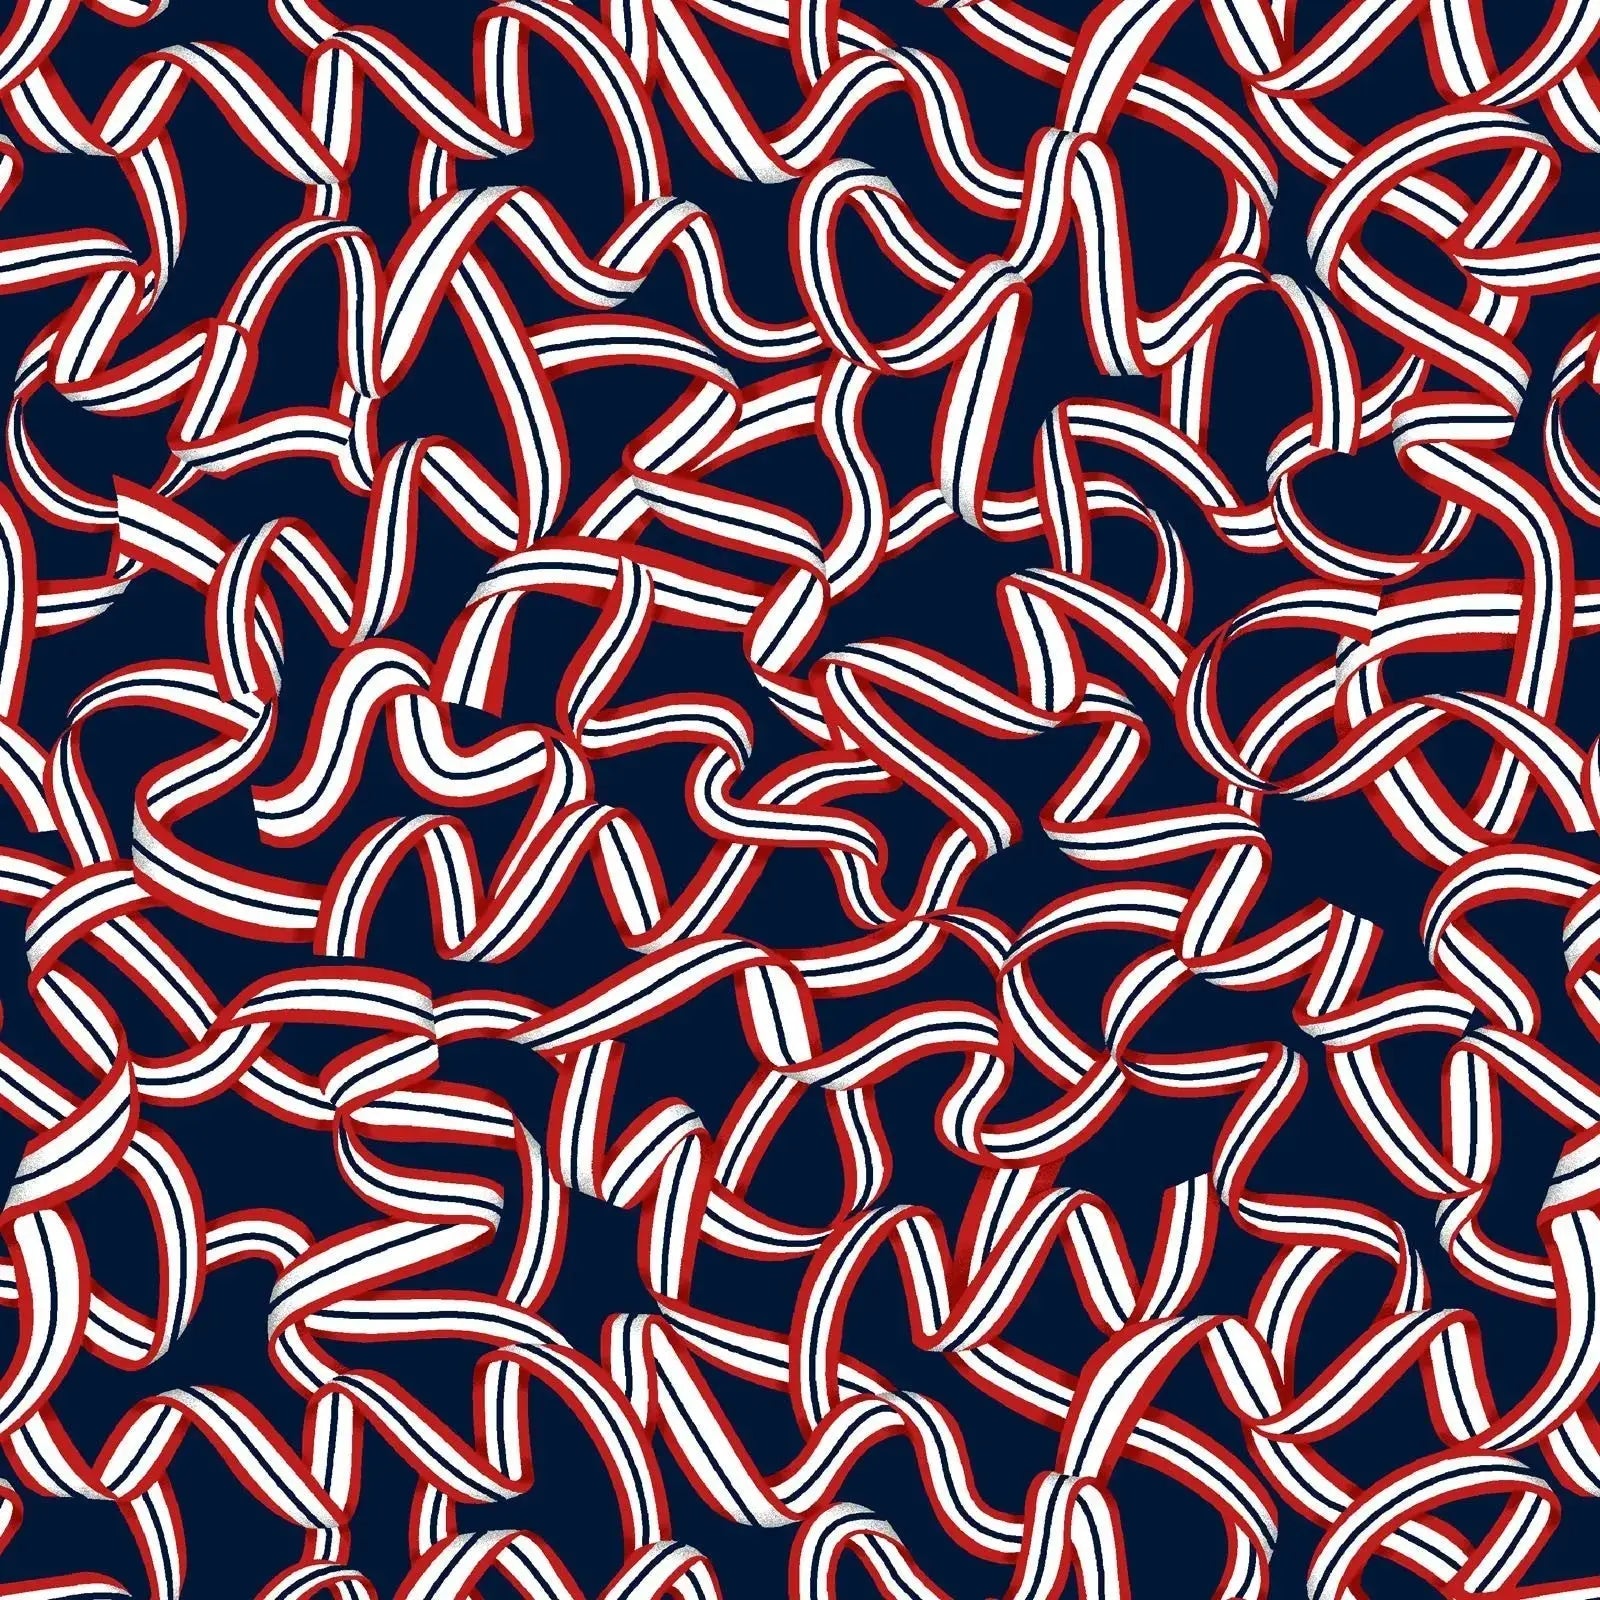 Red White and Starry Blue Too Ribbon Cotton Wideback Fabric ( 1 1/4 yard pack ) - Linda's Electric Quilters